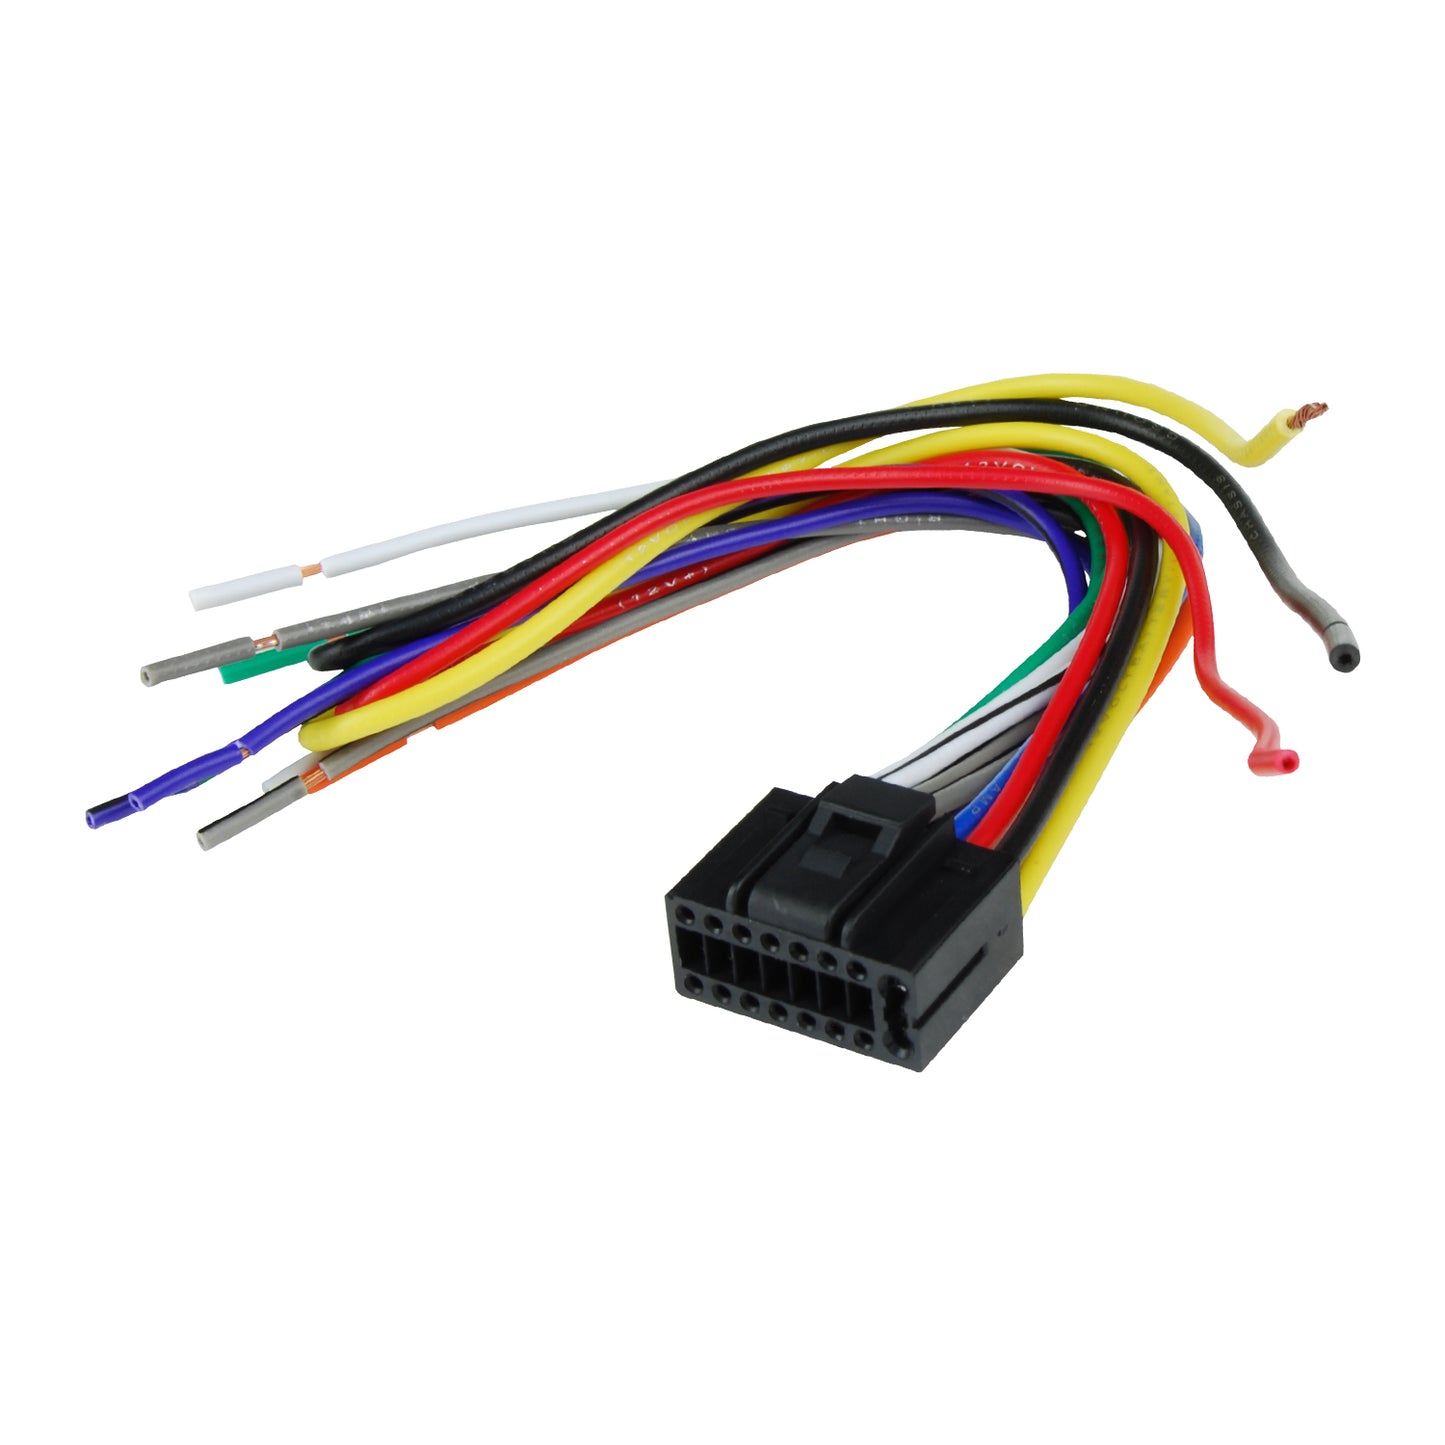 WH-KENWOOD16P - Wiring Harness for Kenwood